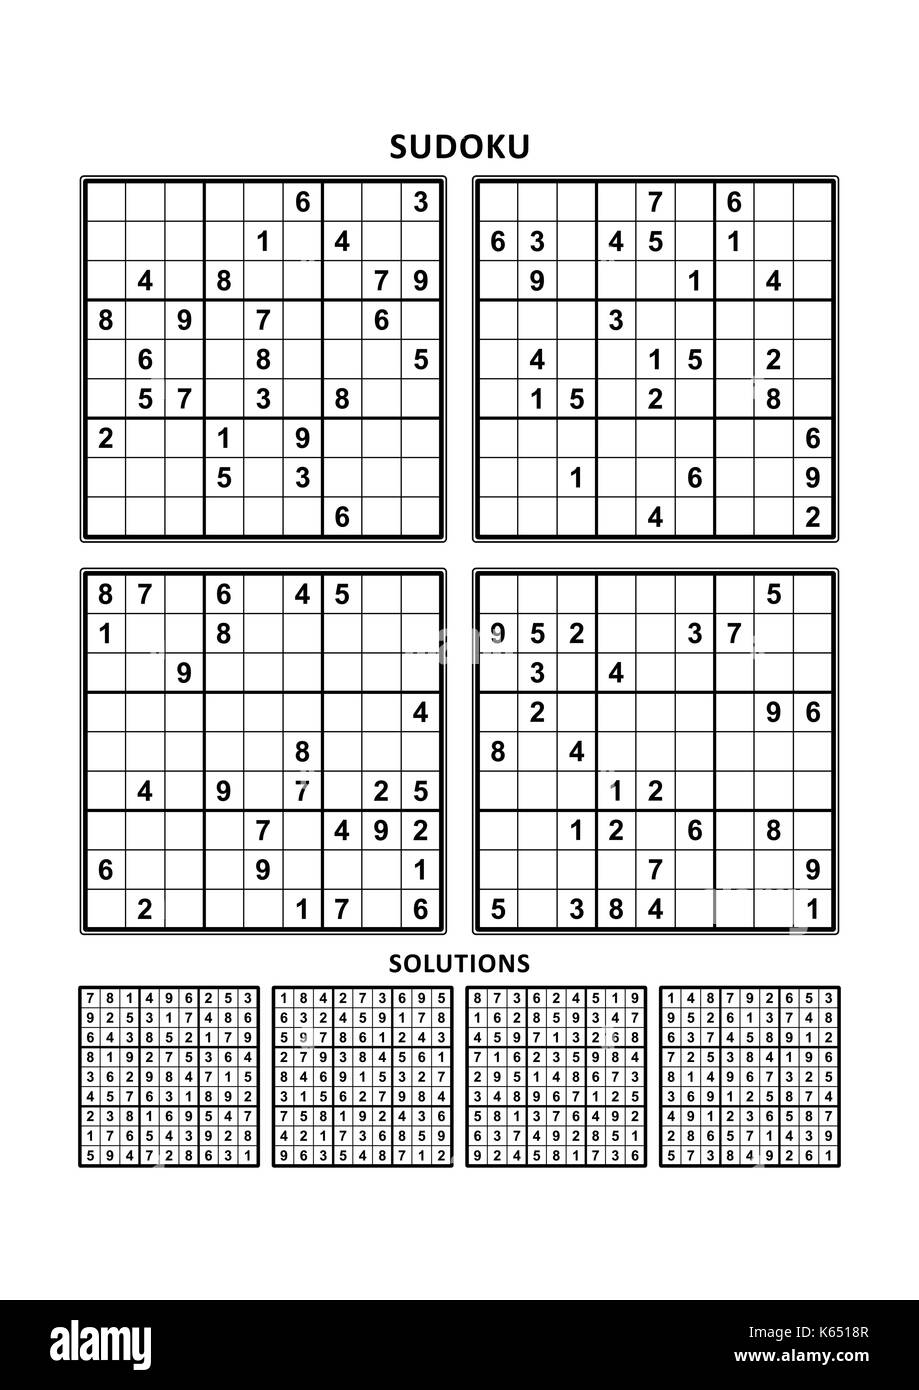 Four sudoku games with answers. Set 2. Stock Vector